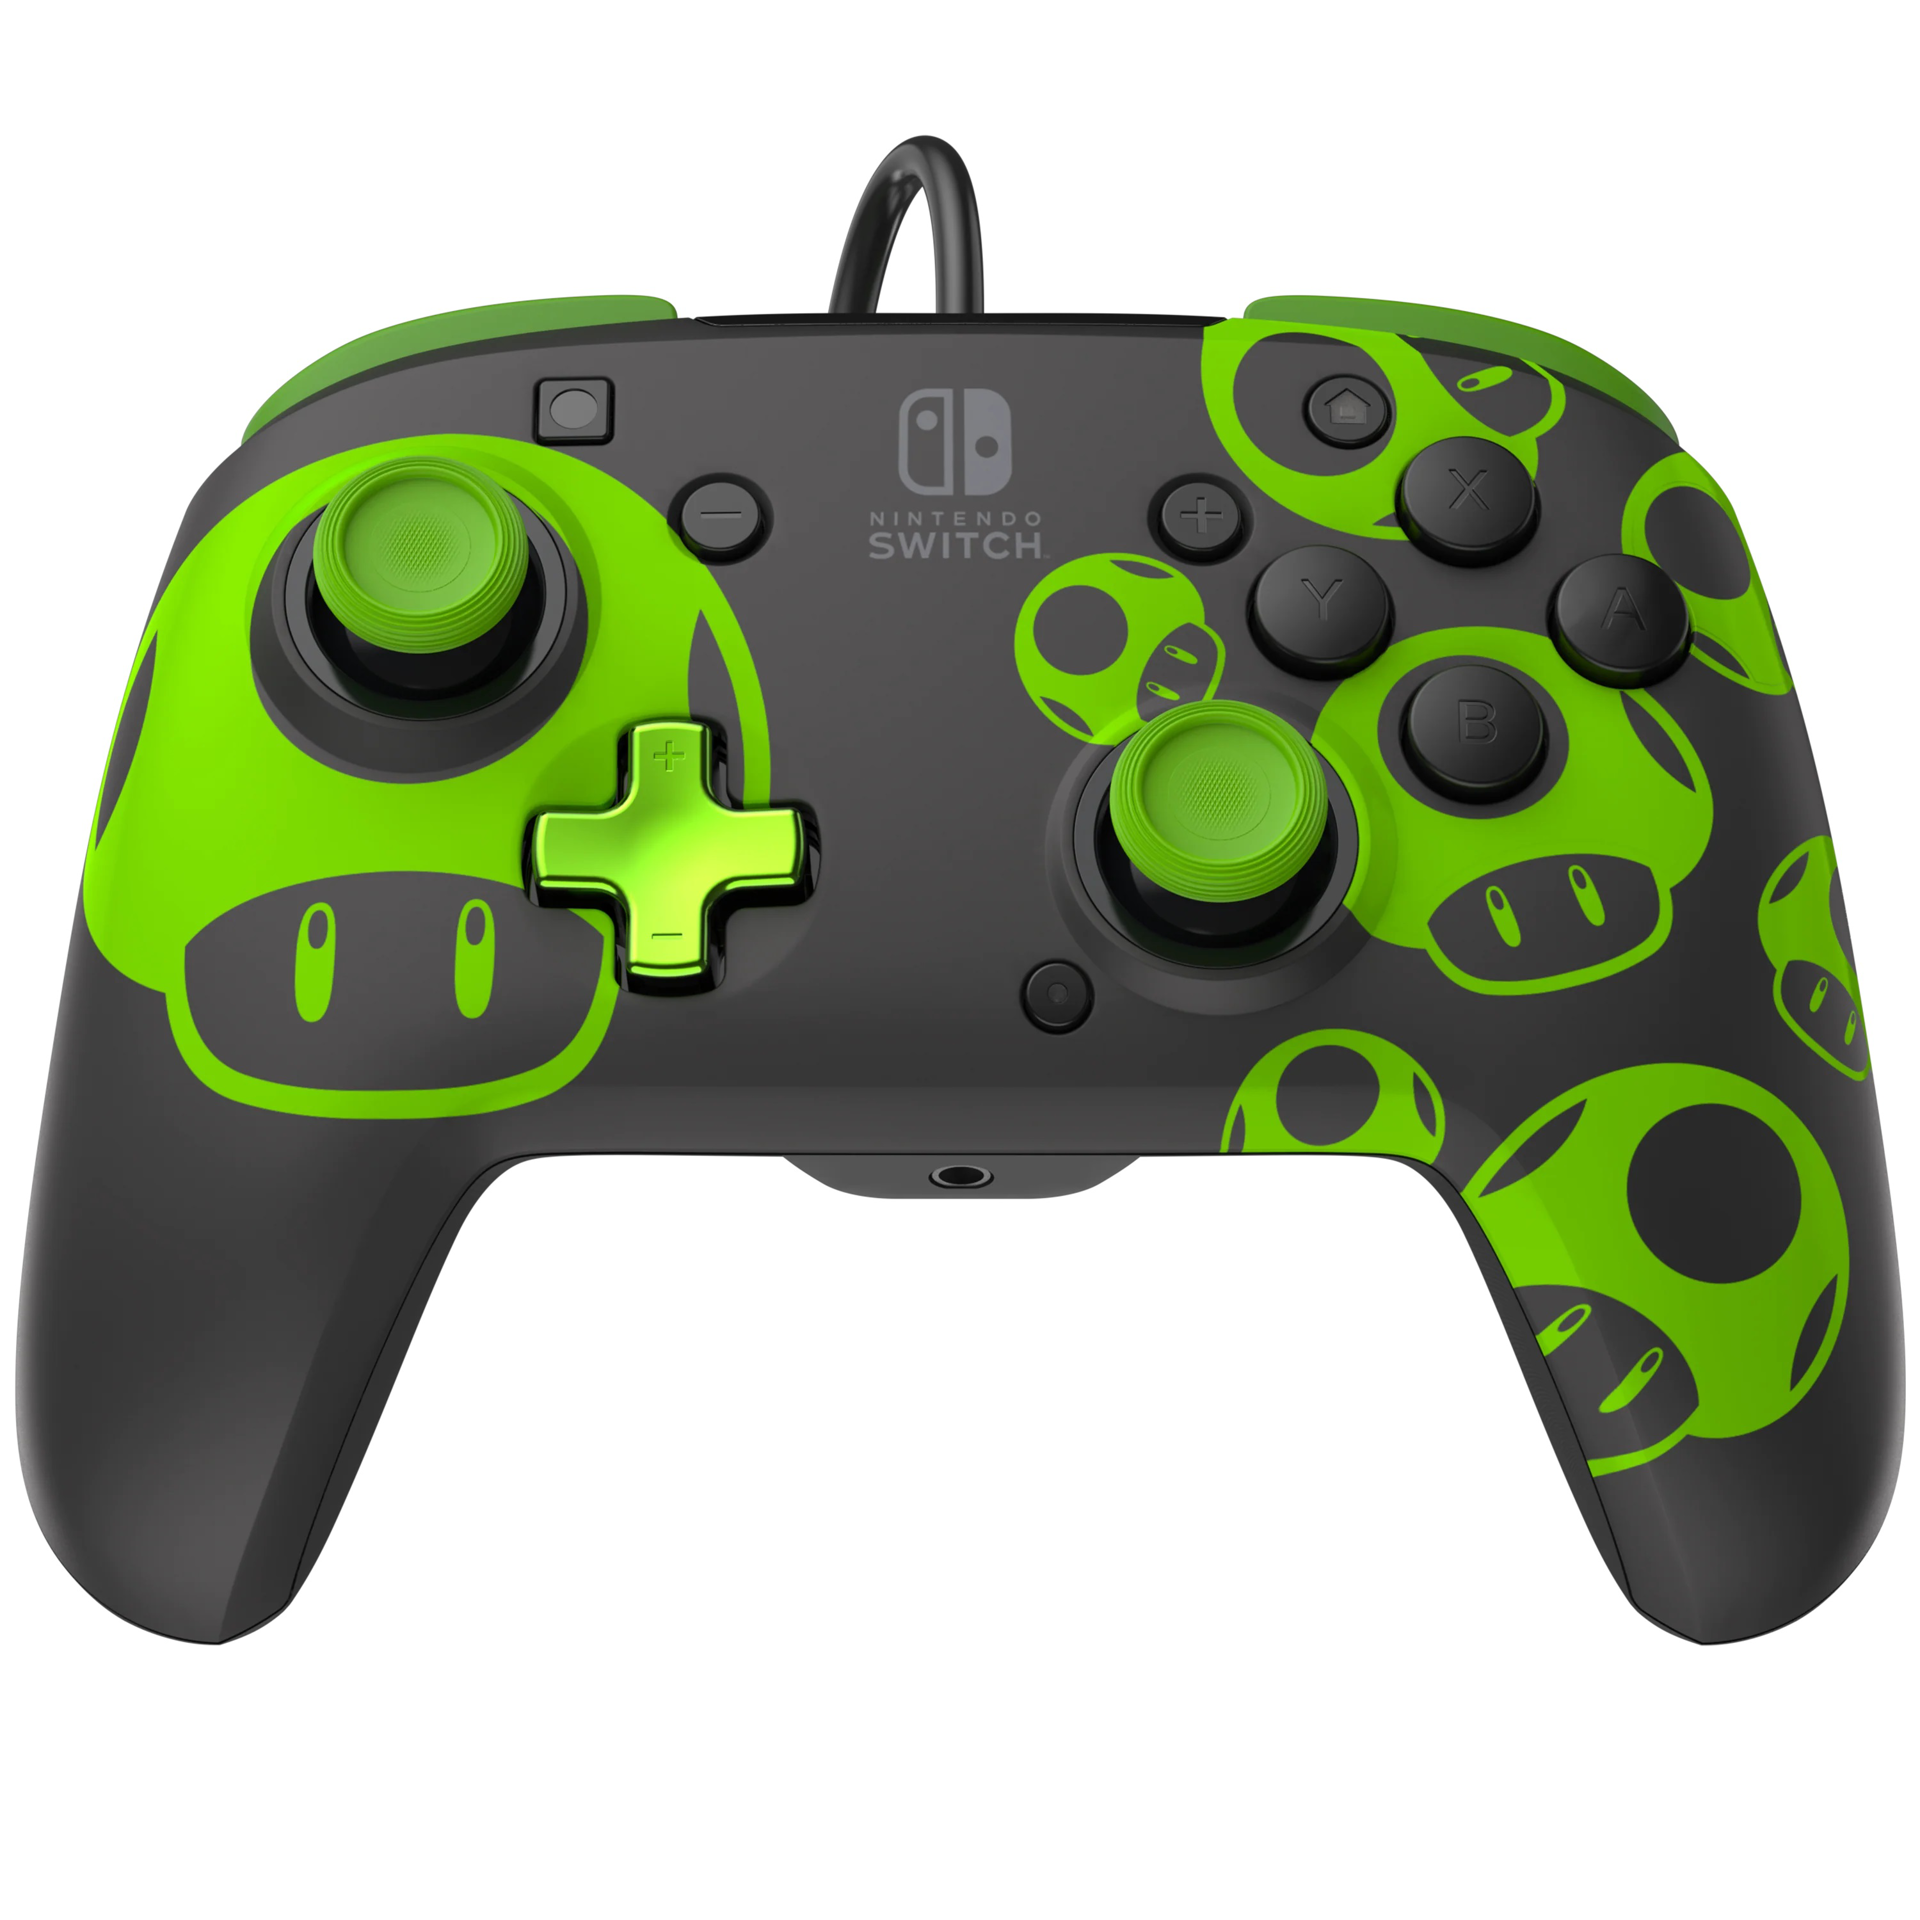 PDP - Manette de jeu filaire REMATCH 1-UP (Glow-in-the-dark) pour Nintendo Switch et Switch OLED